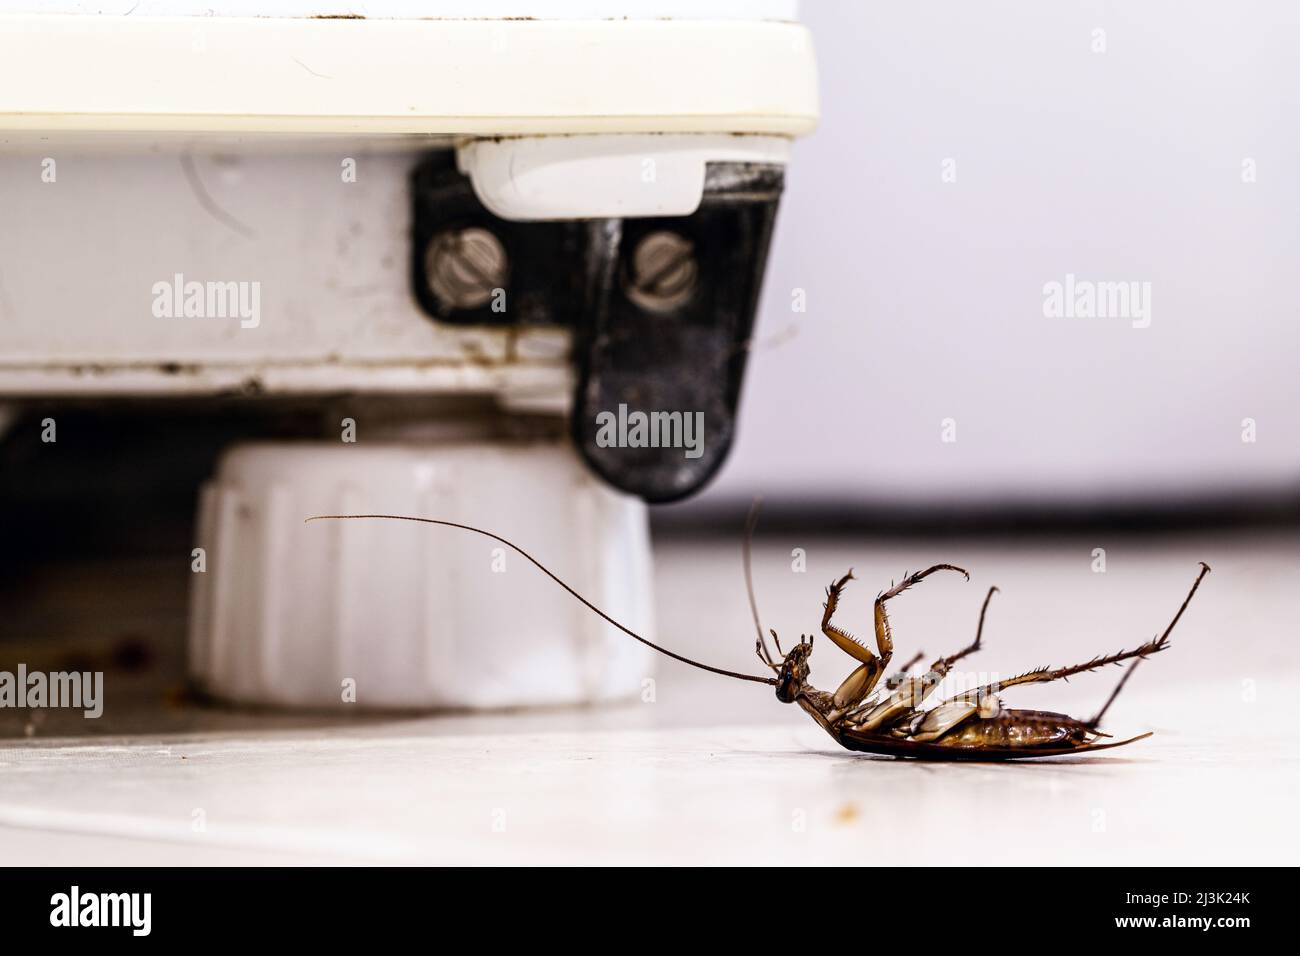 dead cockroach in dirty kitchen, insect problem indoors, pest or infestation Stock Photo